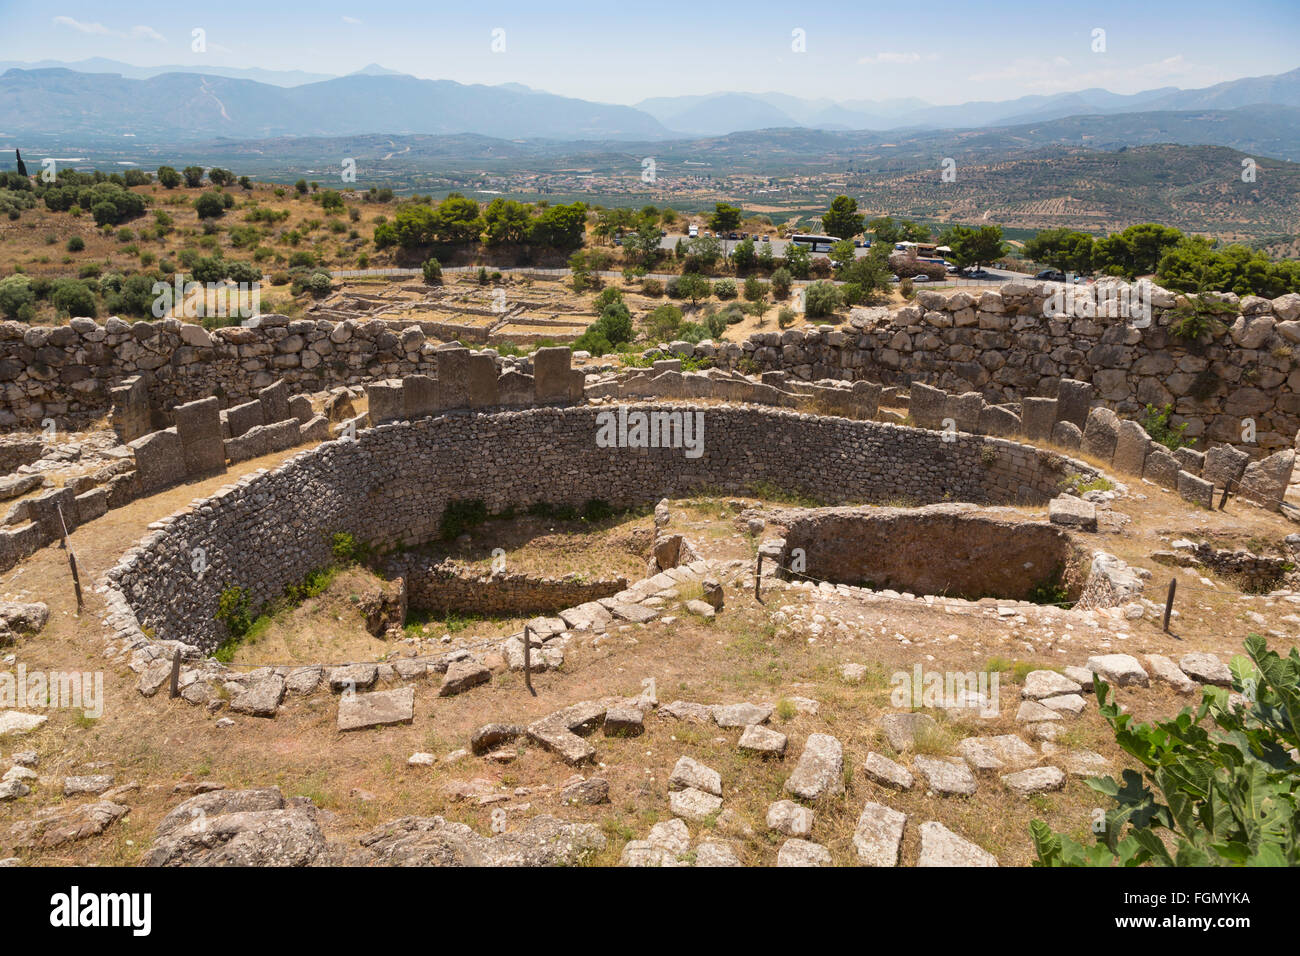 Mycenae, Argolis, Peloponnese, Greece.  Grave Circle A, dating from the 16th century BC, within the walls of the city citadel. Stock Photo